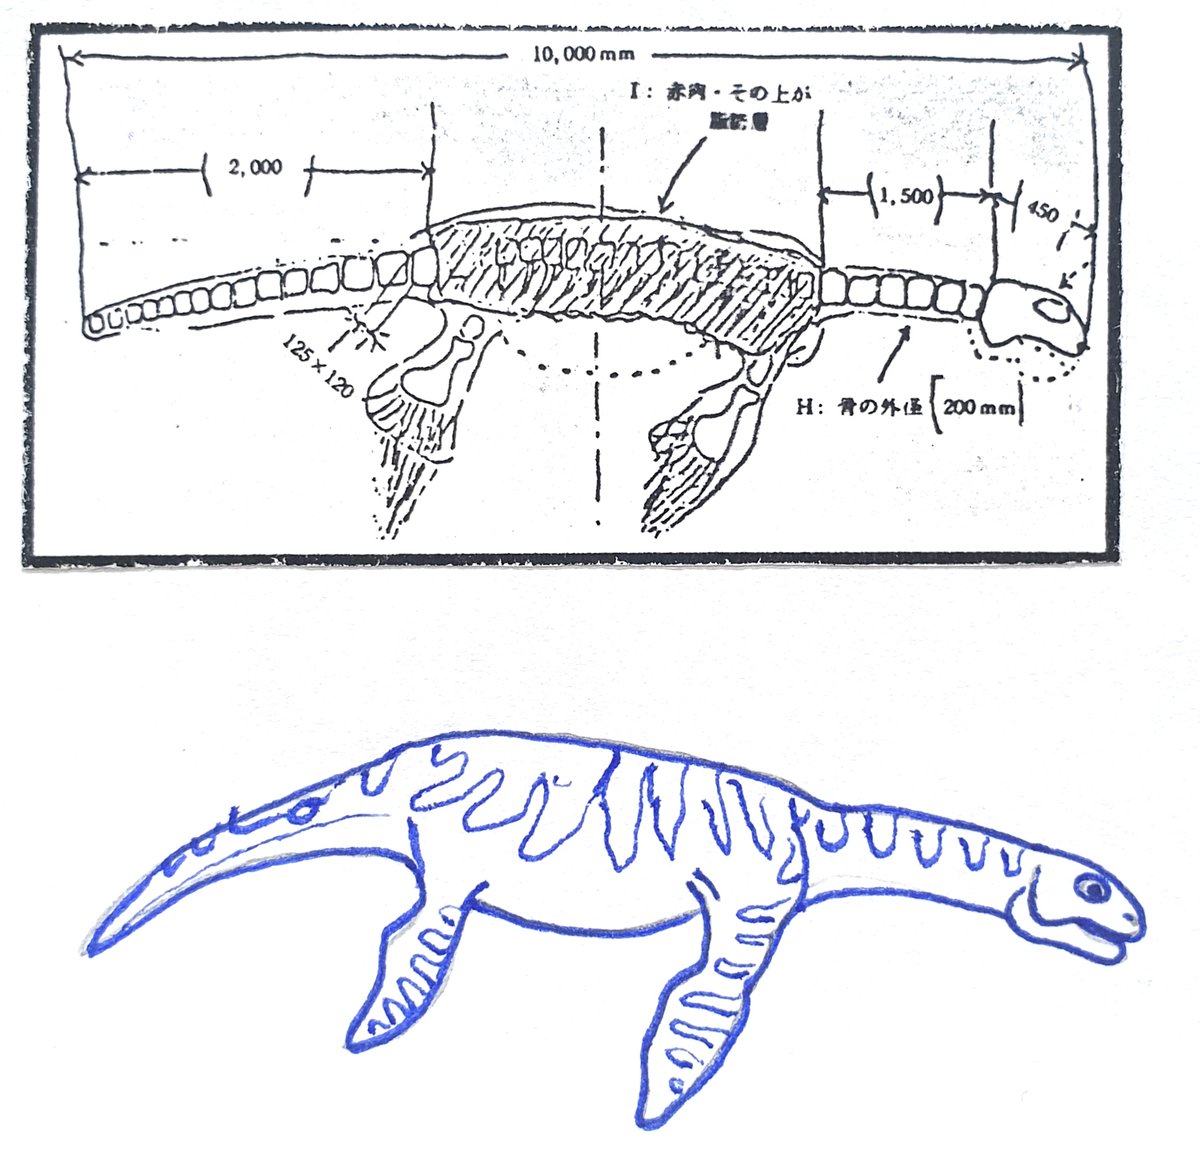 .... where he thought the mandible should be. He’d seemingly made up his mind that it _was_ a plesiosaur carcass (drawings by me).